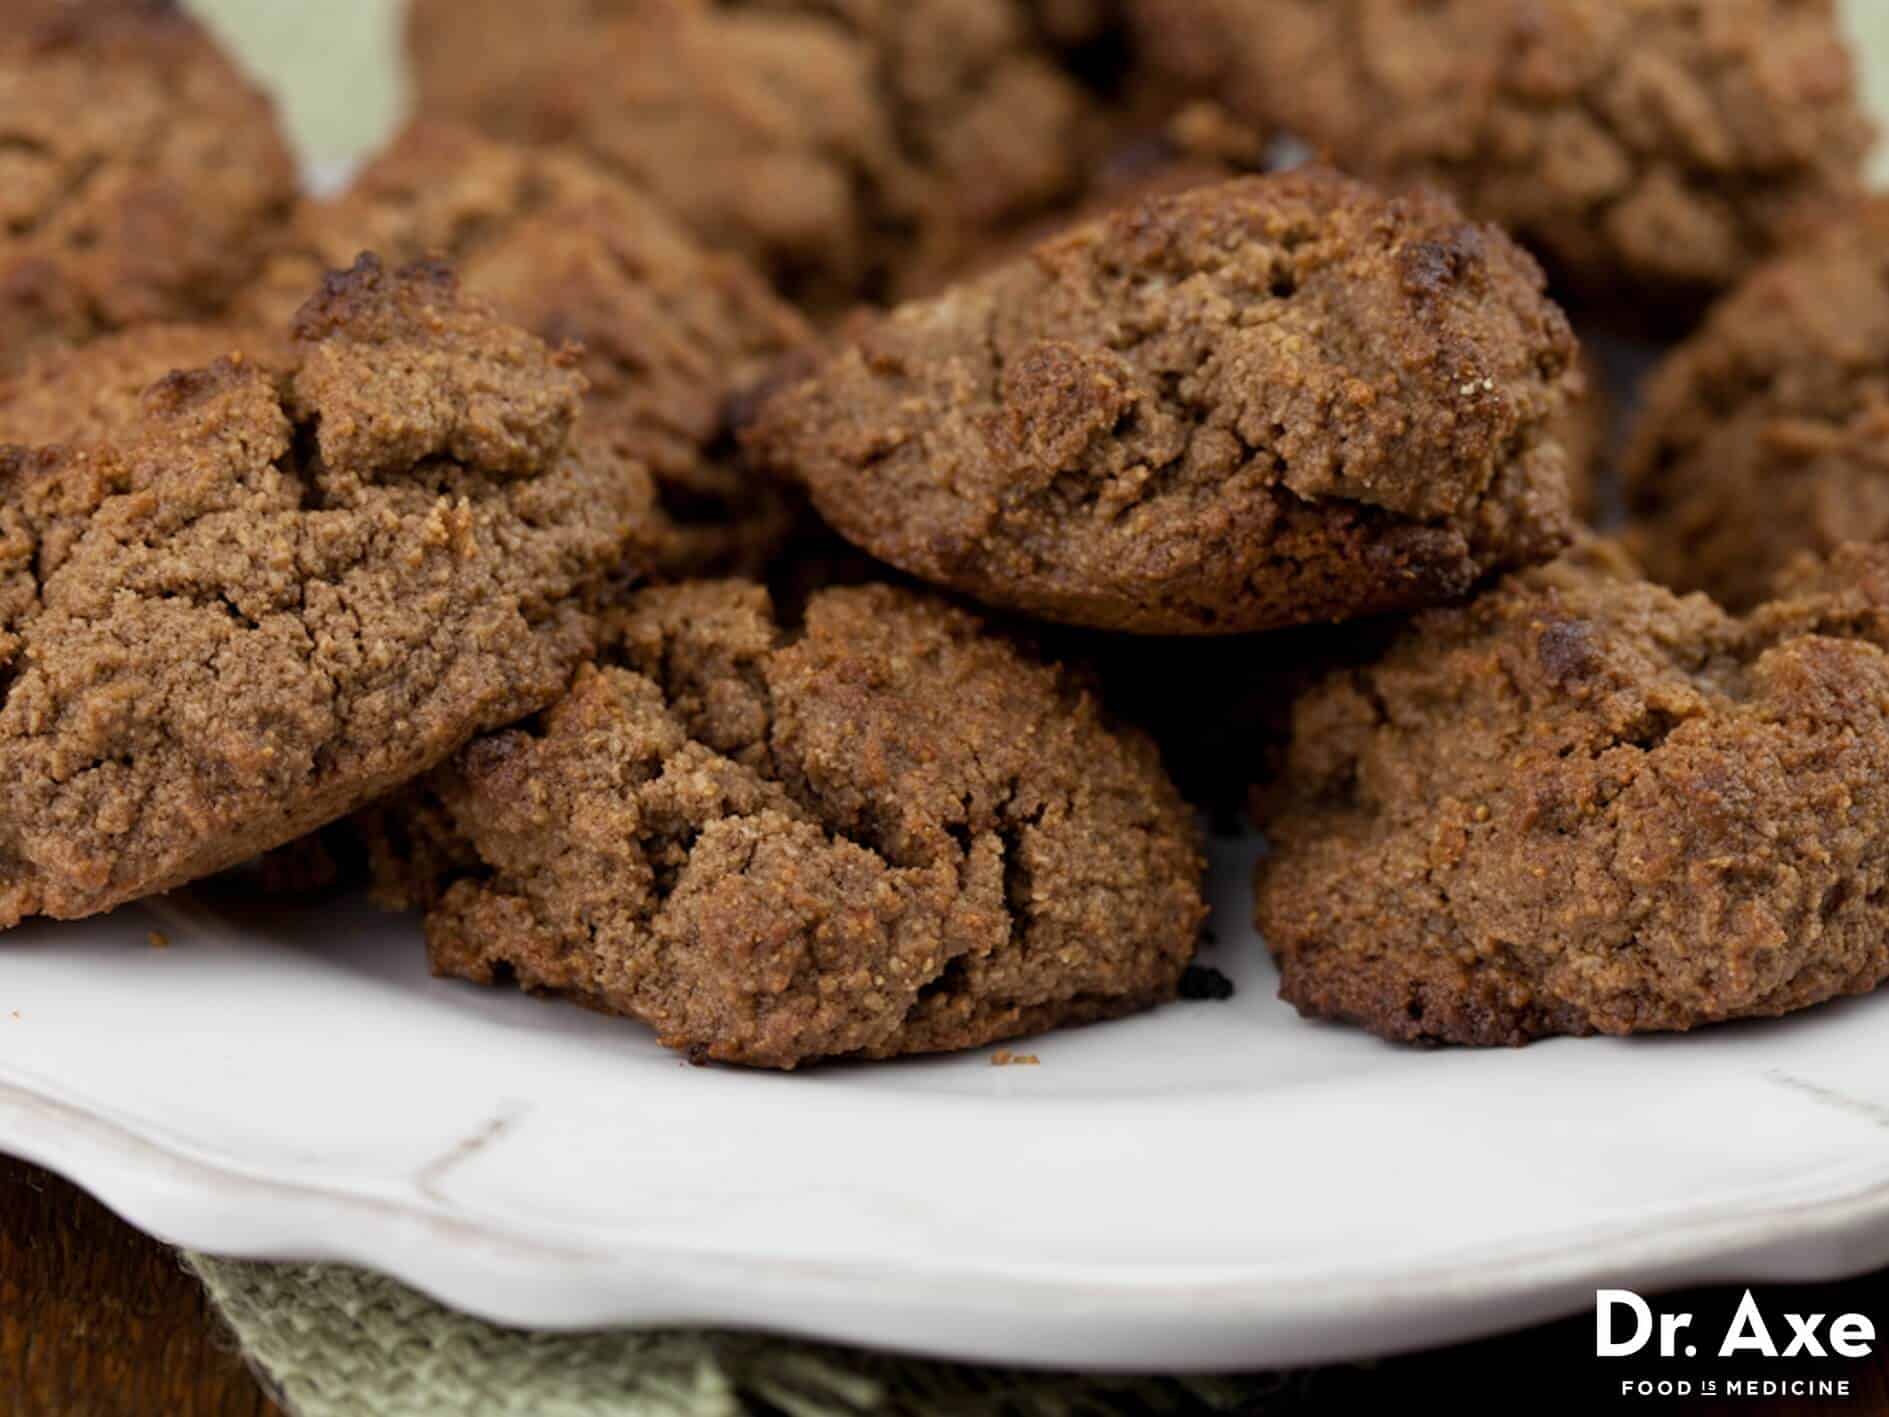 Almond butter cookie recipe - Dr. Axe